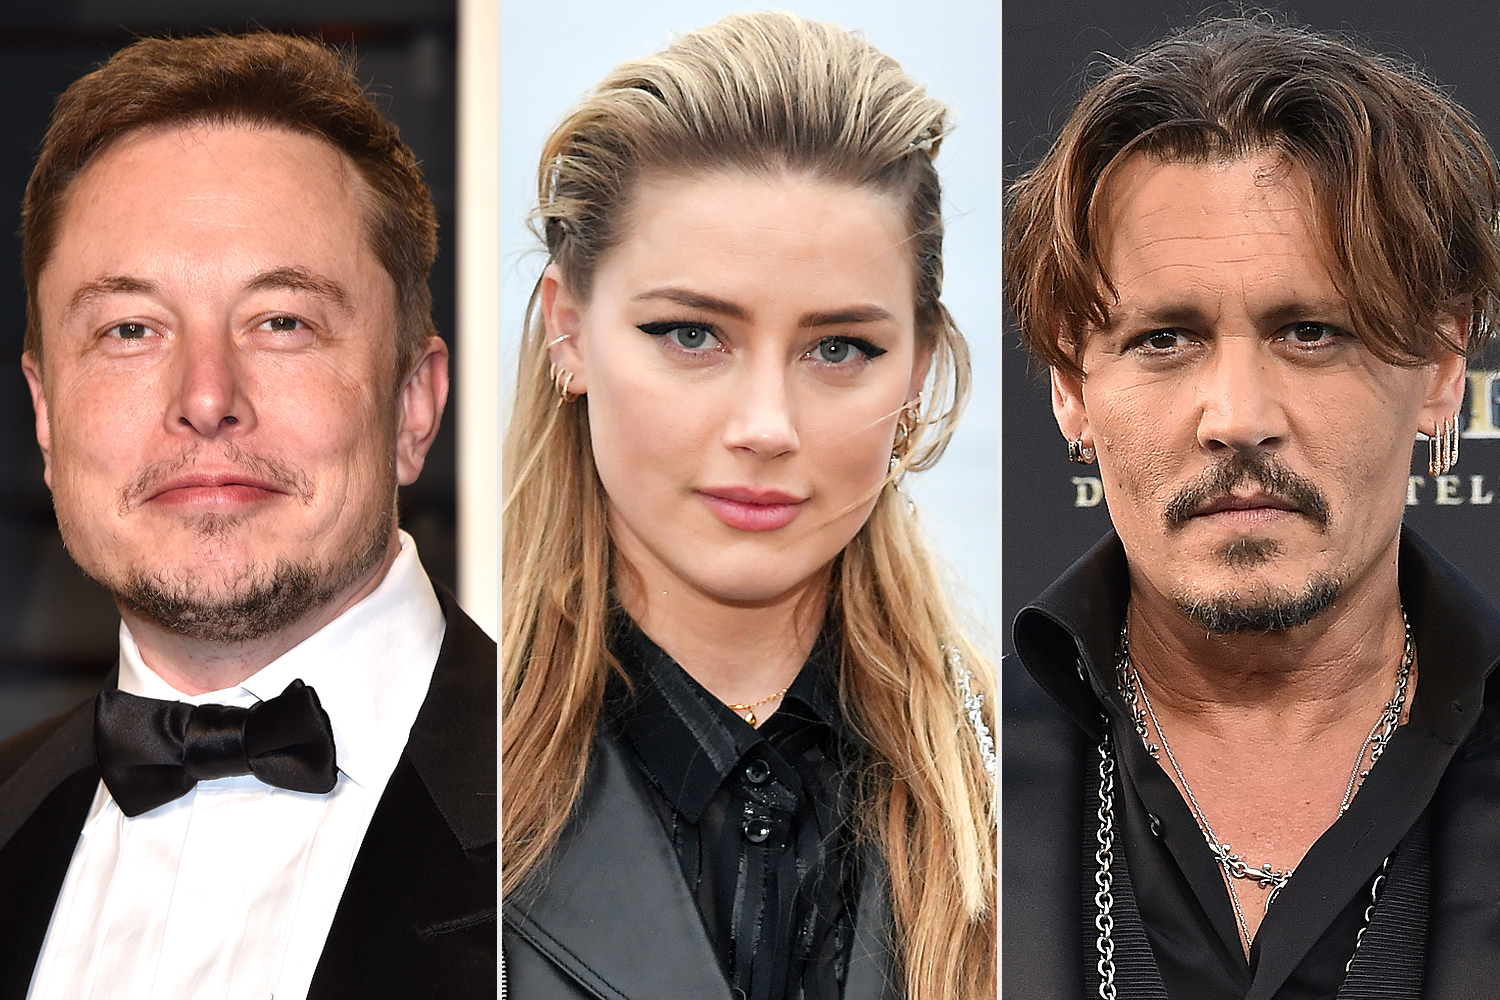 Johnny Depp accused Amber Heard of cheating on him with Elon Musk